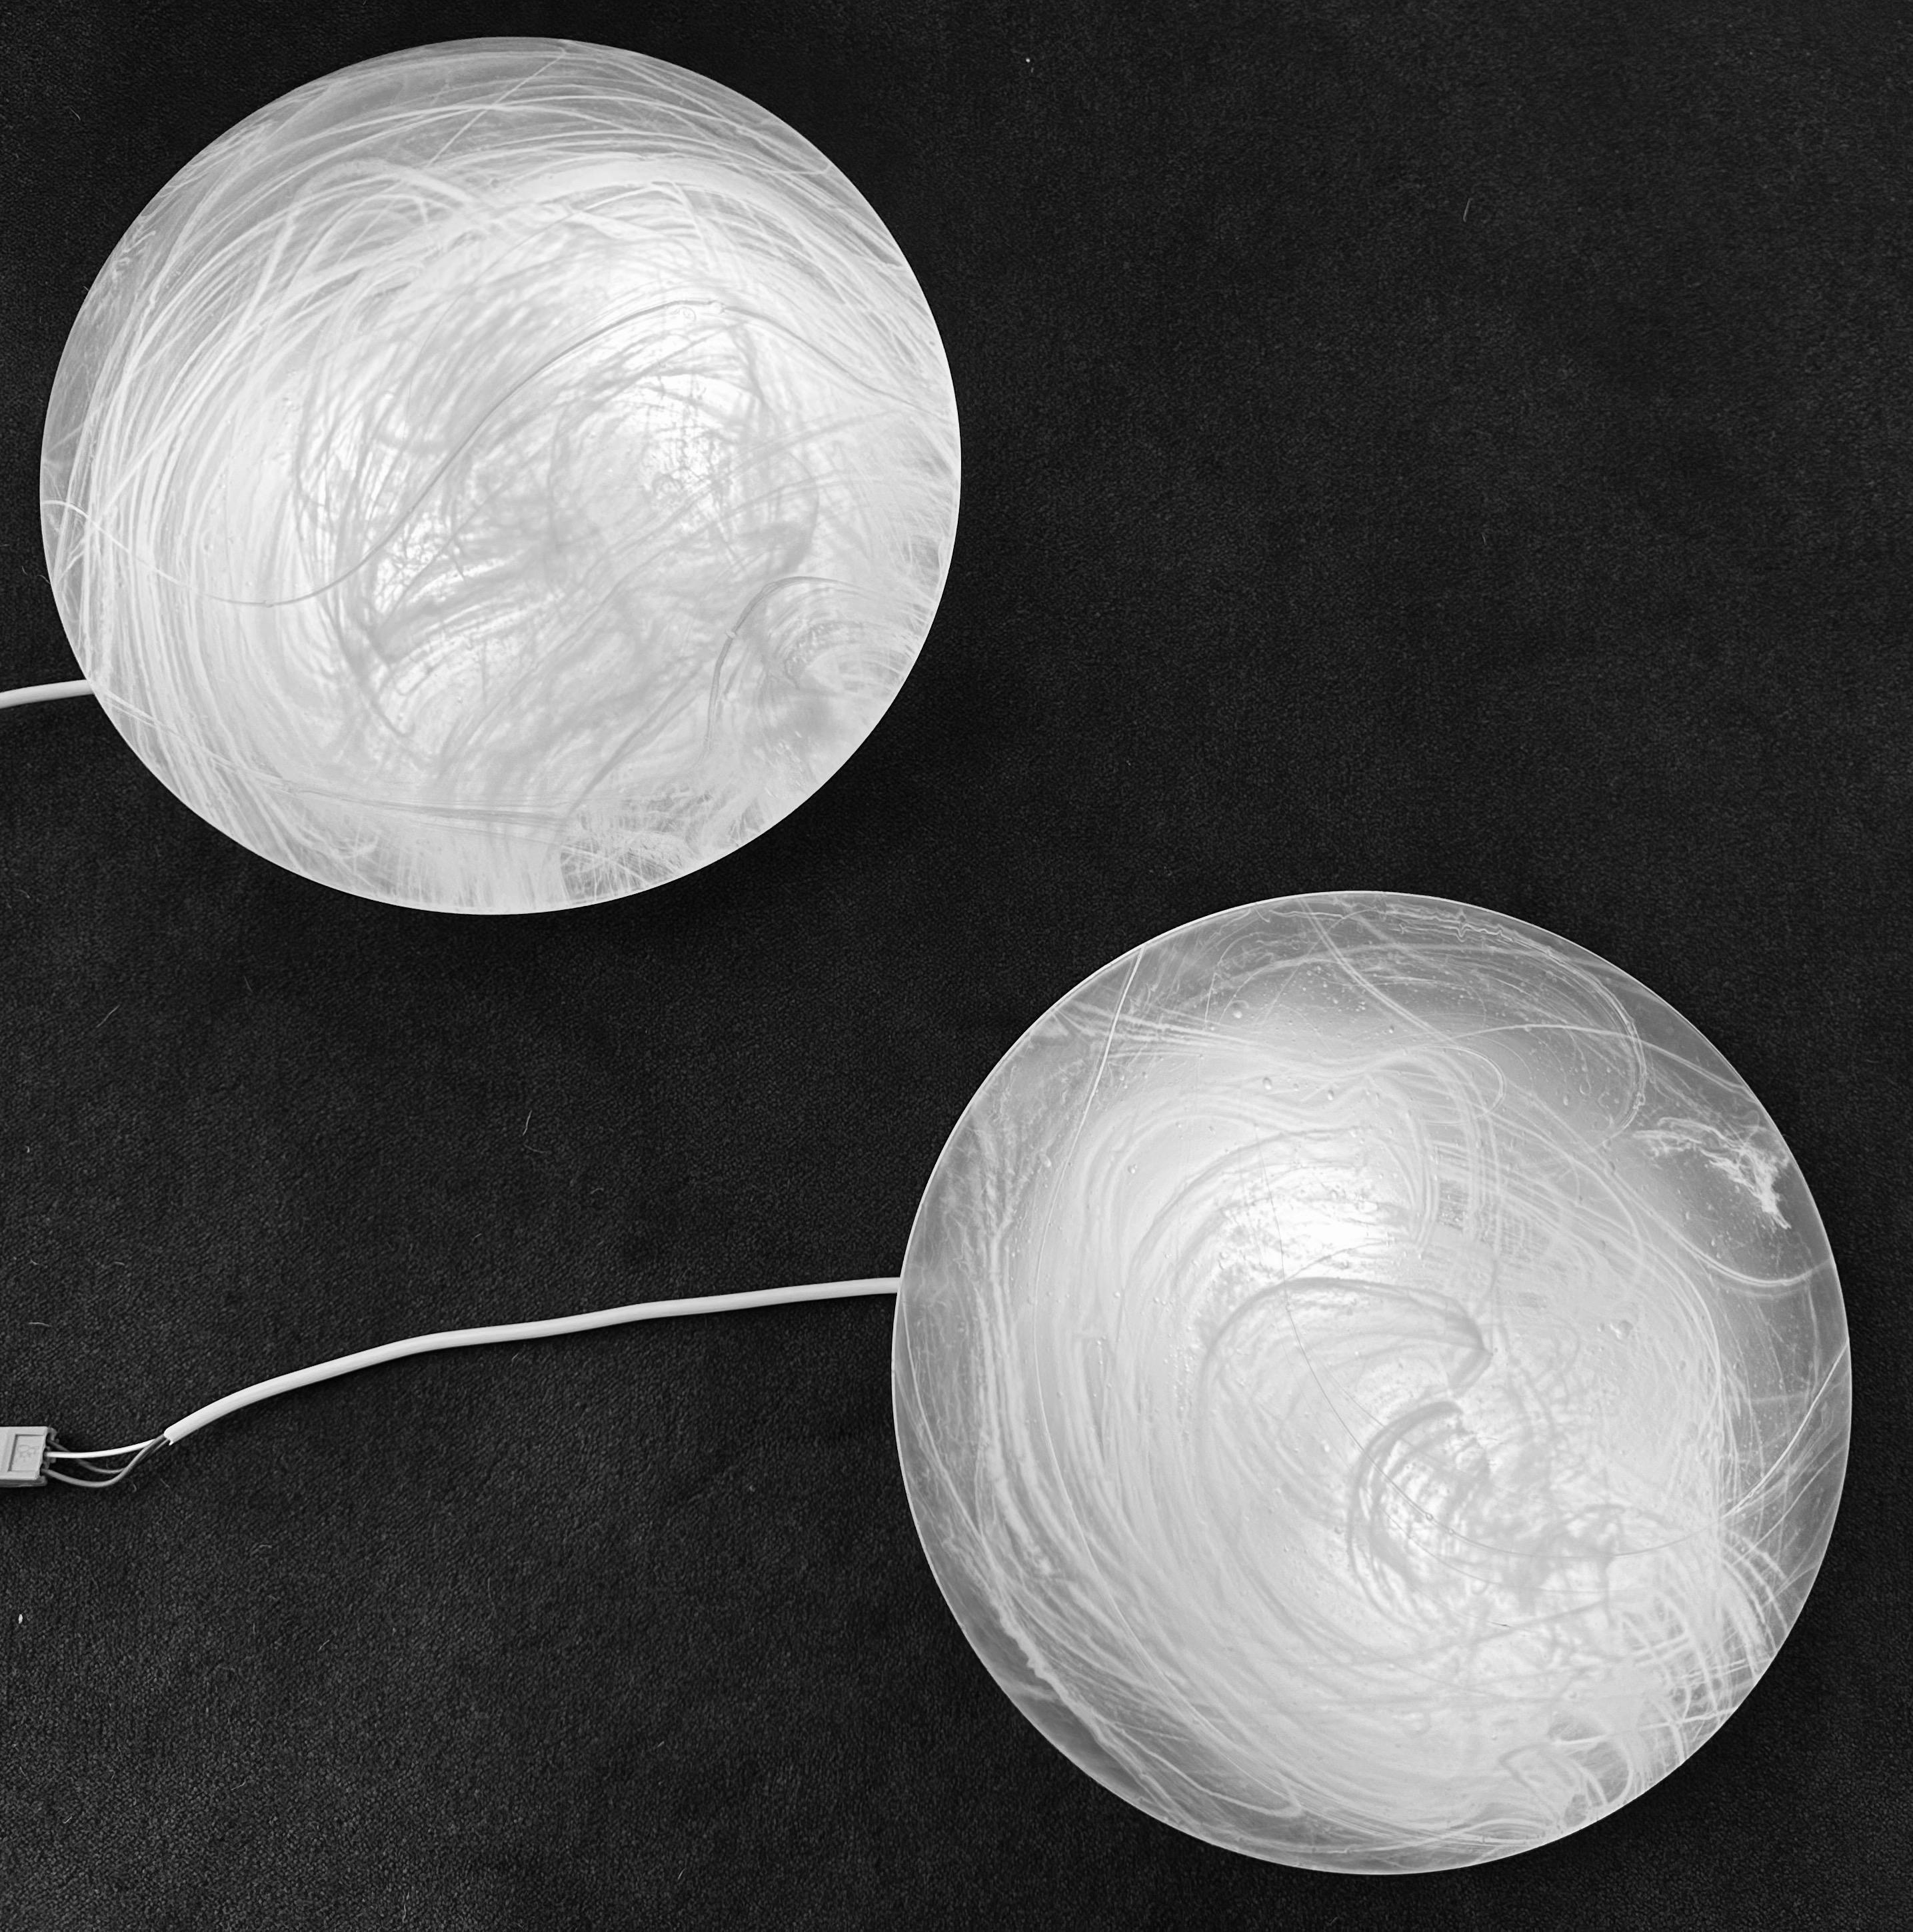 An unusual pair of 1970s German Peill & Putzler space-age frosted glass with a swirled cloud-like pattern wall lights/sconces or flush mount ceiling lights. The frosted glass round shades slot onto the white lacquered metal bulb holders and turns